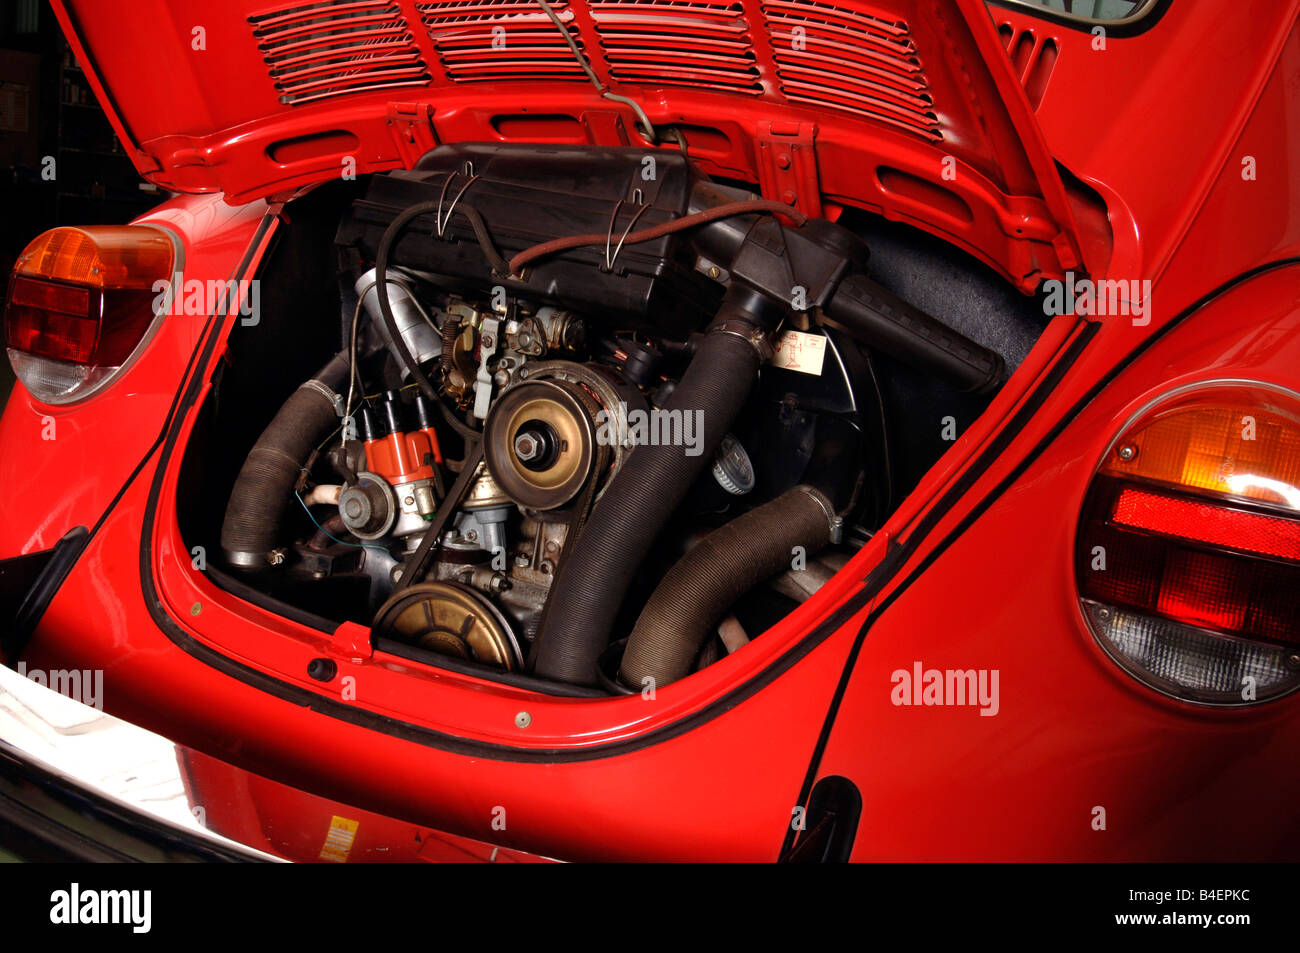 Car, VW, Volkswagen, beetle 1303, model year 1972-1975, red, old car, engine compartment, engine , technics, technical, technica Stock Photo